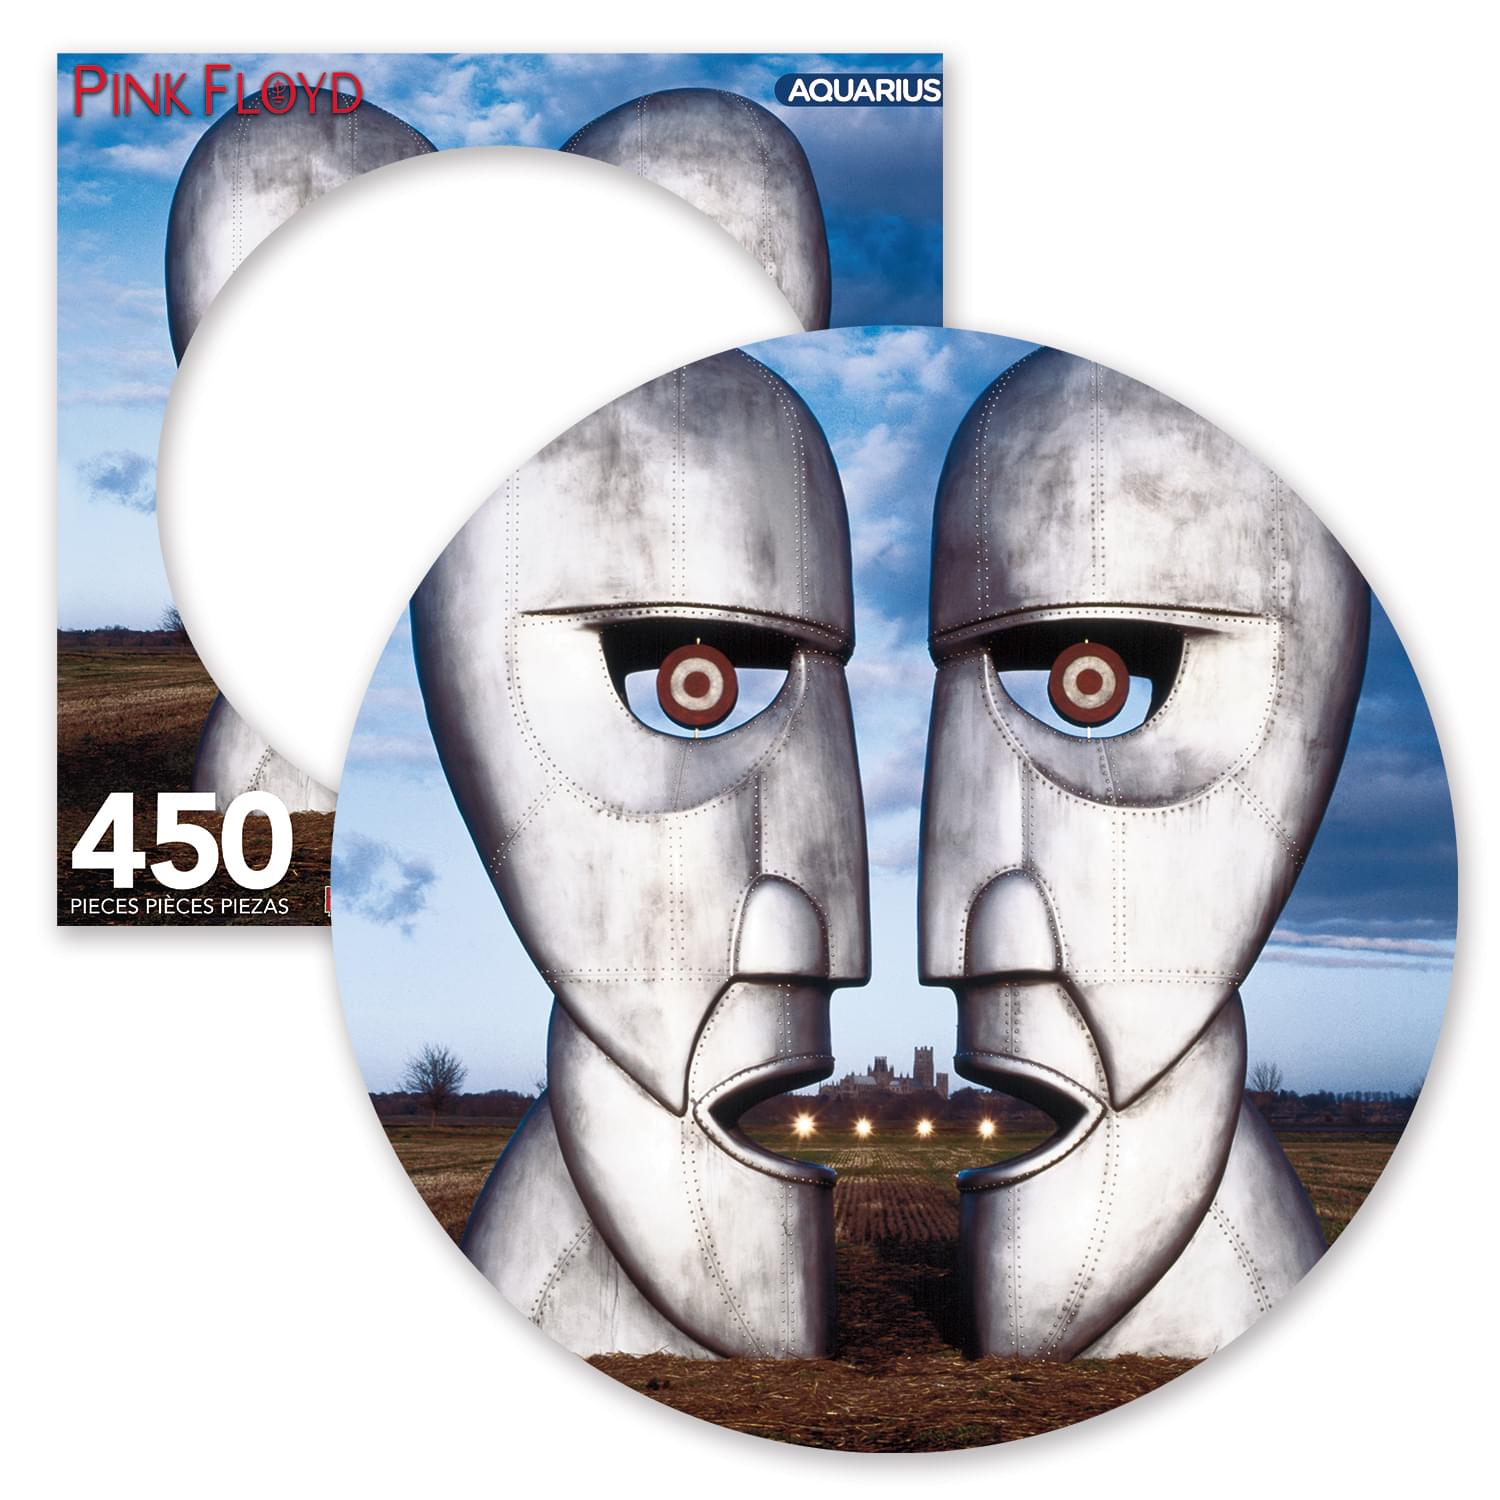 Pink Floyd Division Bell 450 Piece Picture Disc Jigsaw Puzzle